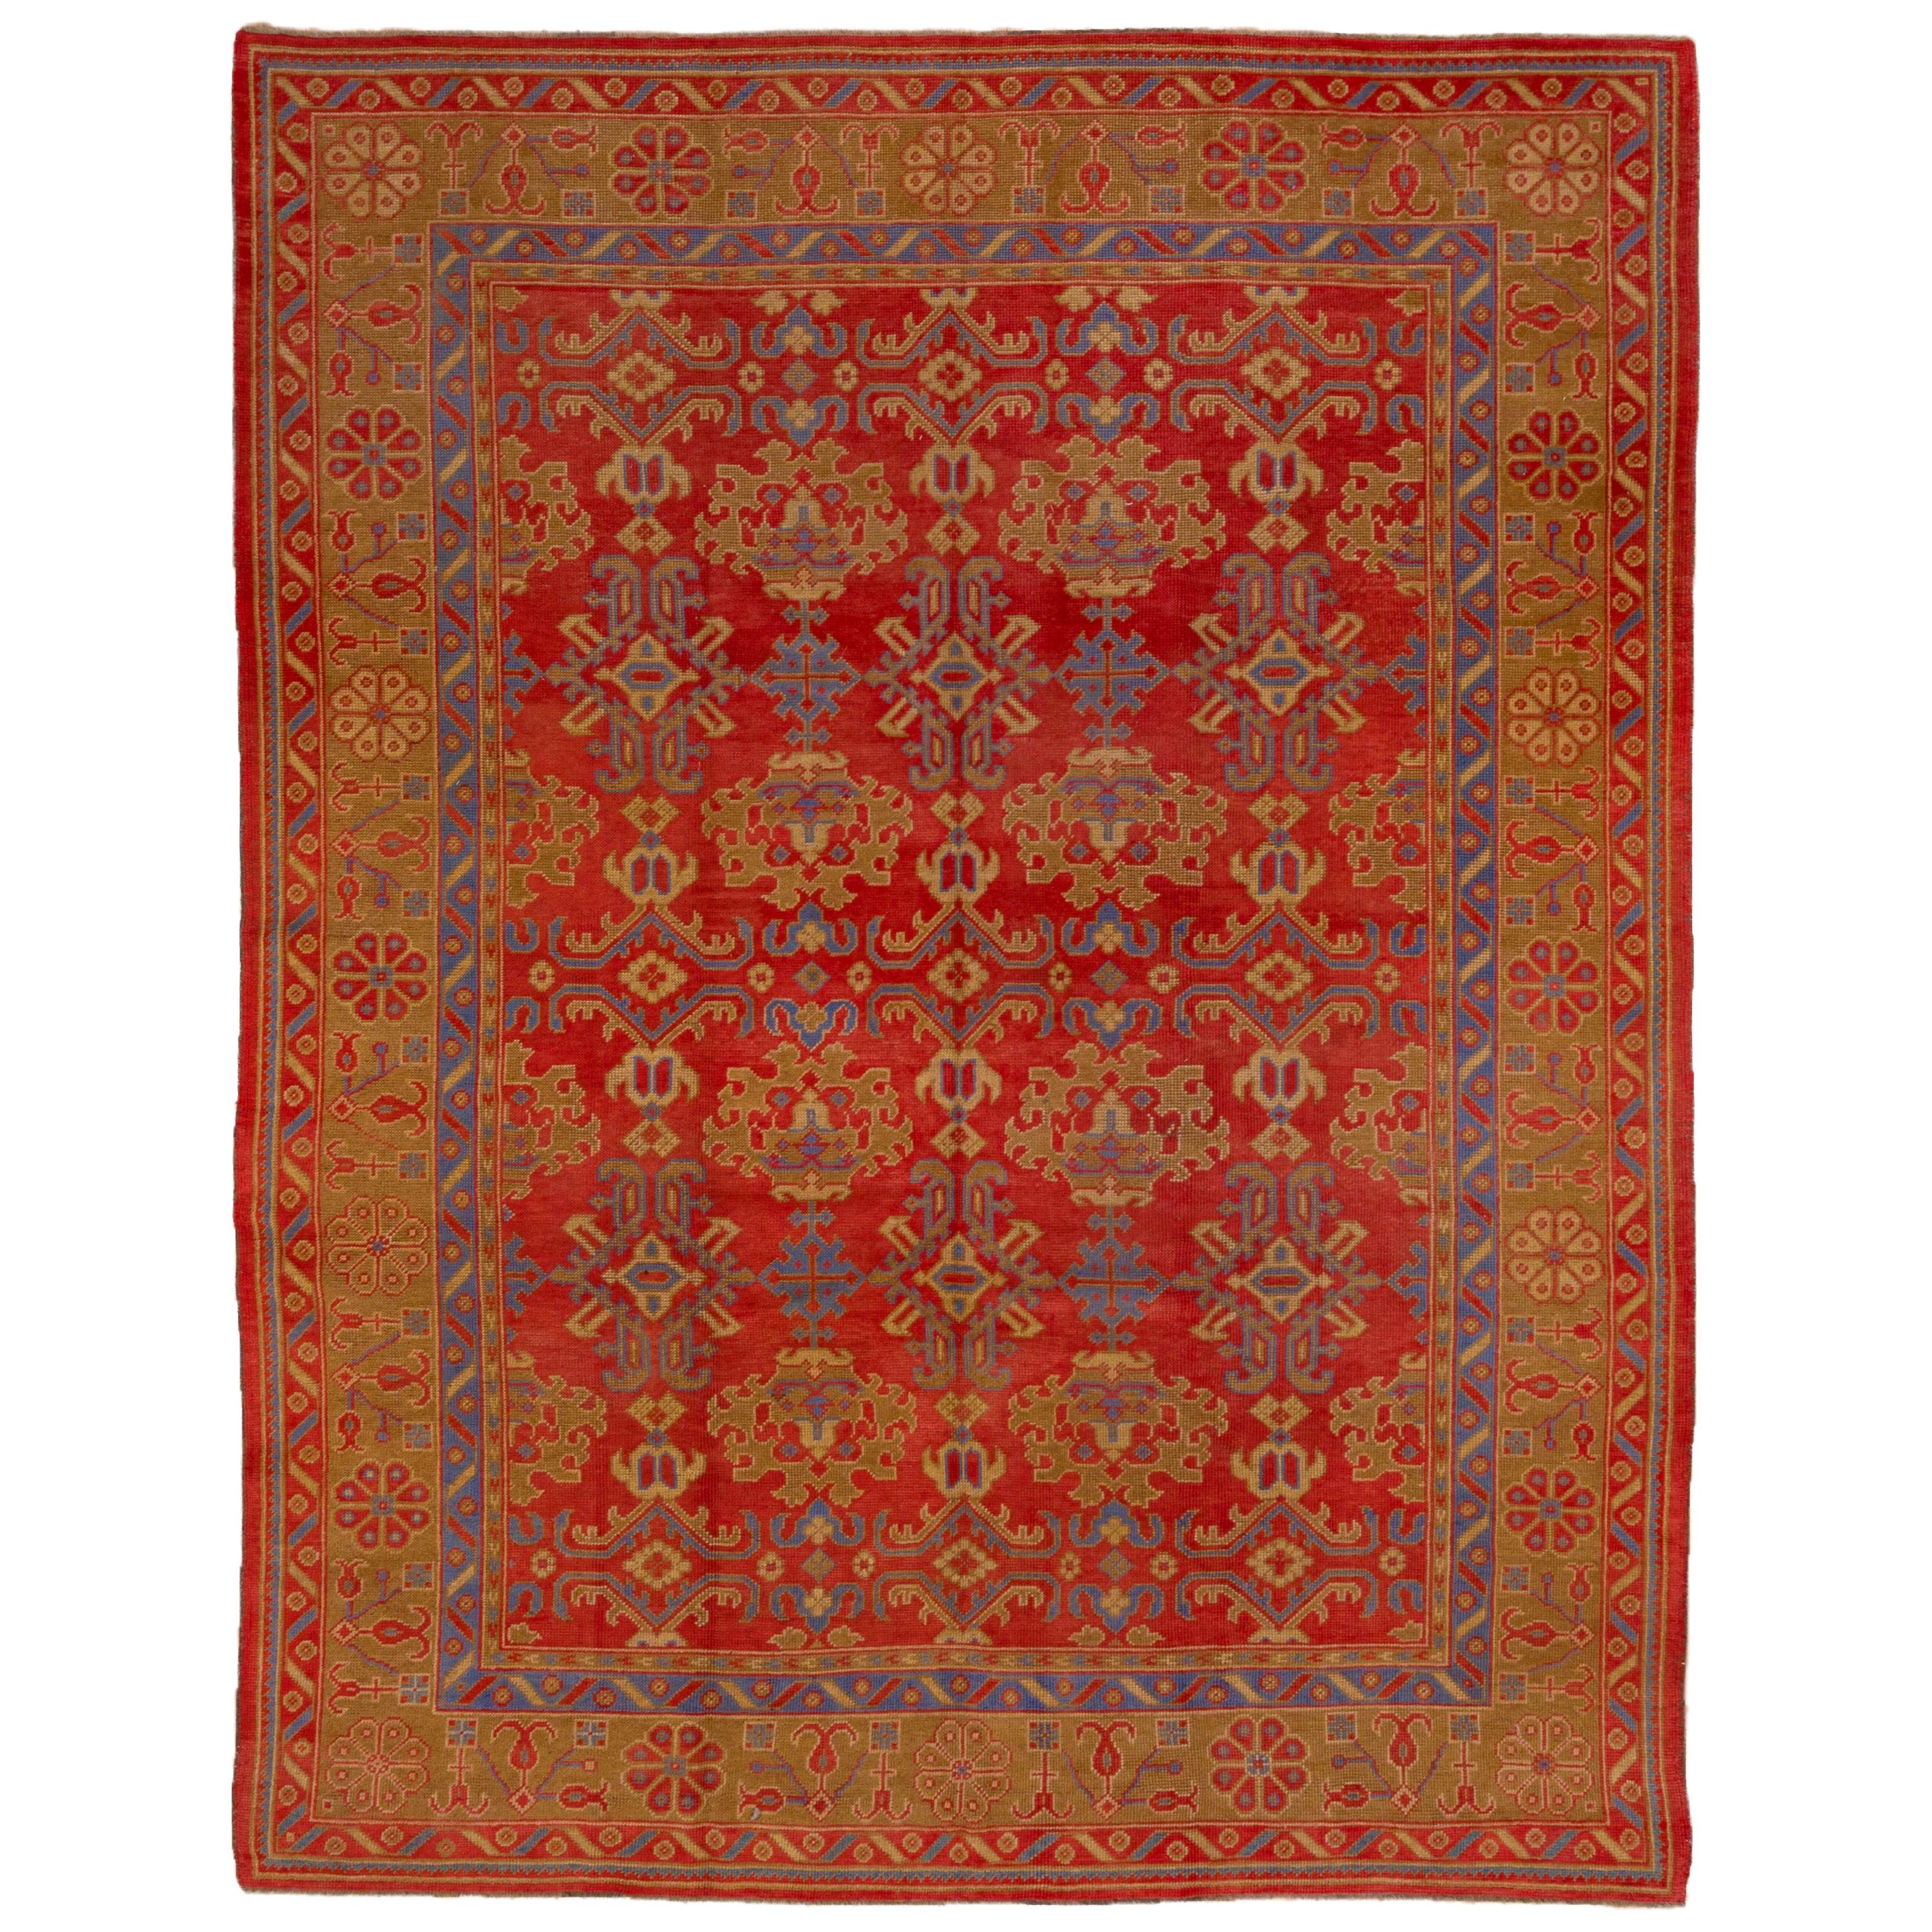 Colorful Antique Oushak Rug, Bright Red Field, Multicolored Borders, circa 1930s